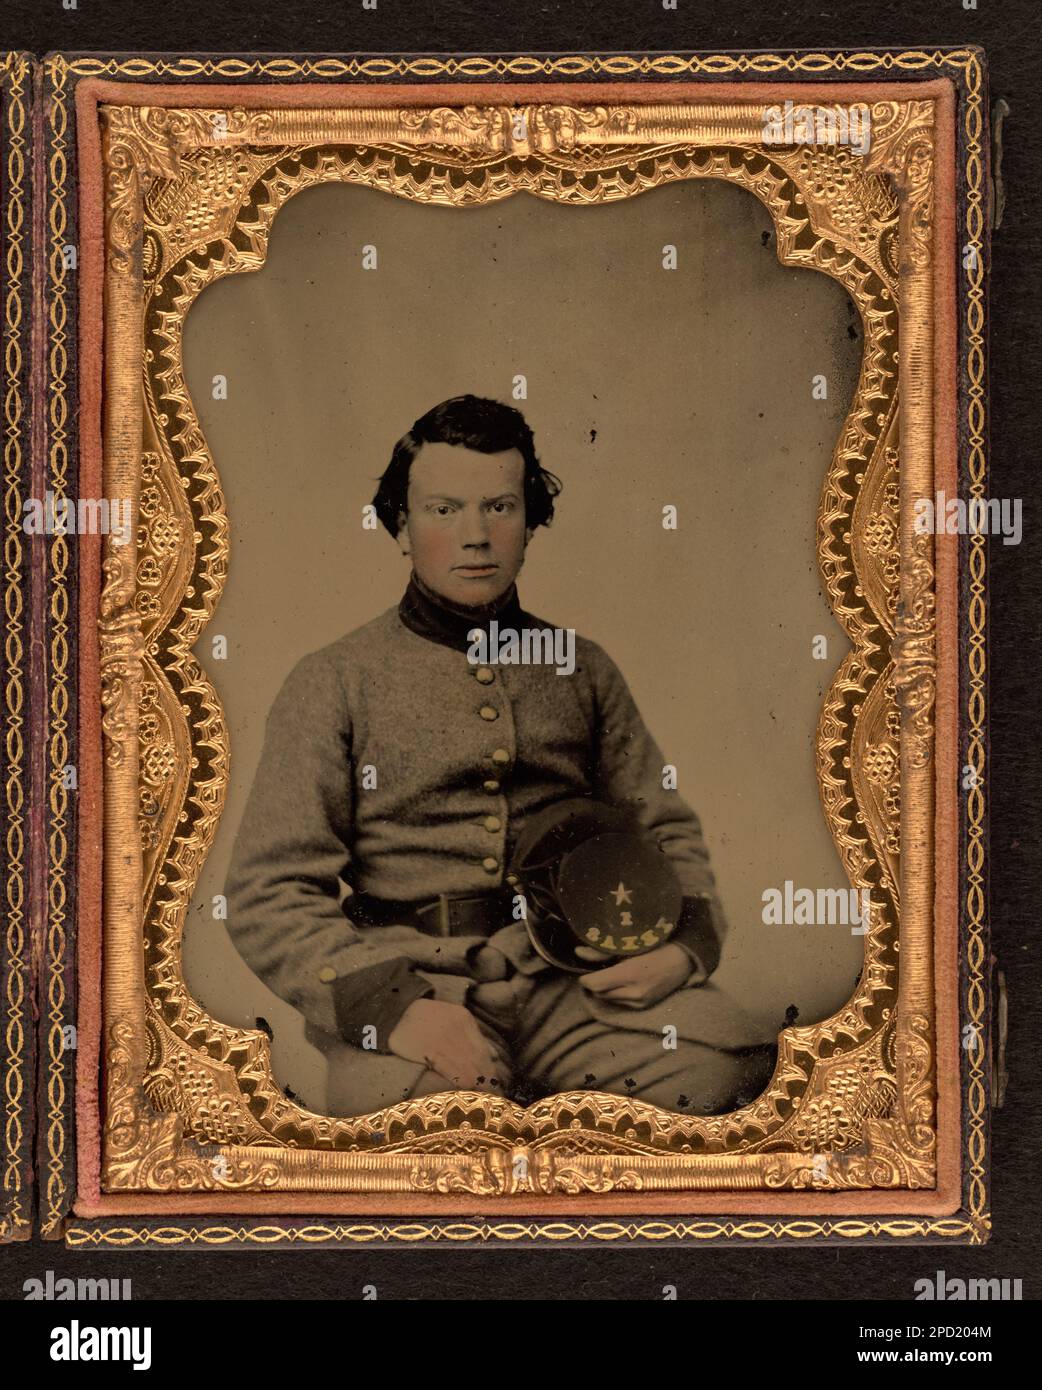 Unidentified soldier of 1st Texas Infantry Regiment in uniform with wishbone belt buckle. Liljenquist Family Collection of Civil War Photographs , FAmbrotype/Tintype photograph filing series , pp/liljconfed. Confederate States of America, Army, Texas Infantry Regiment, 1st, People, 1860-1870, Soldiers, Confederate, 1860-1870, Military uniforms, Confederate, 1860-1870, United States, History, Civil War, 1861-1865, Military personnel, Confederate. Stock Photo